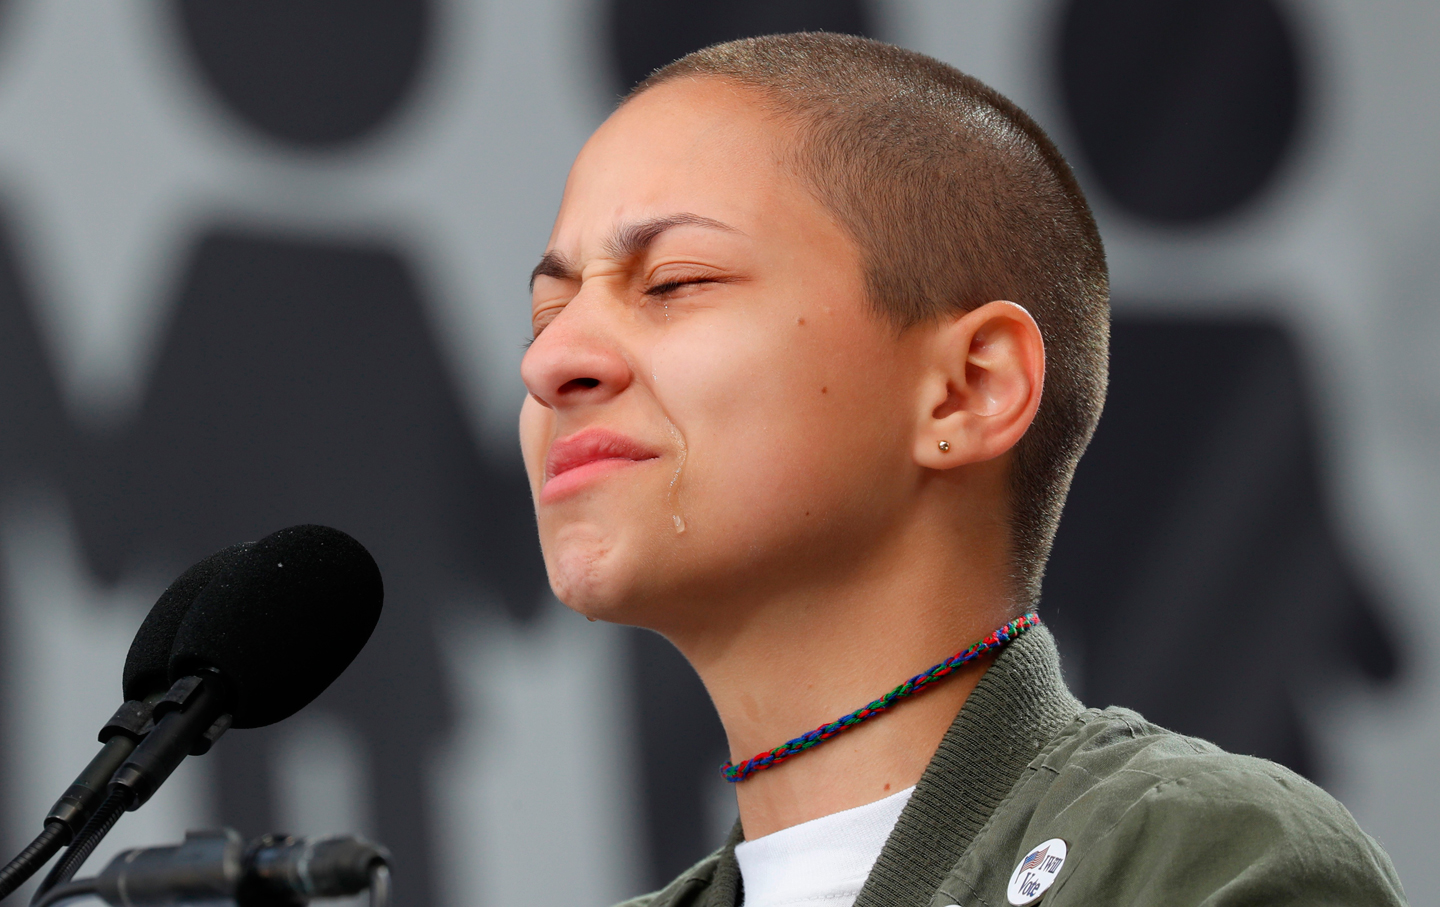 The Parkland Students Are Showing My Generation a Path Forward